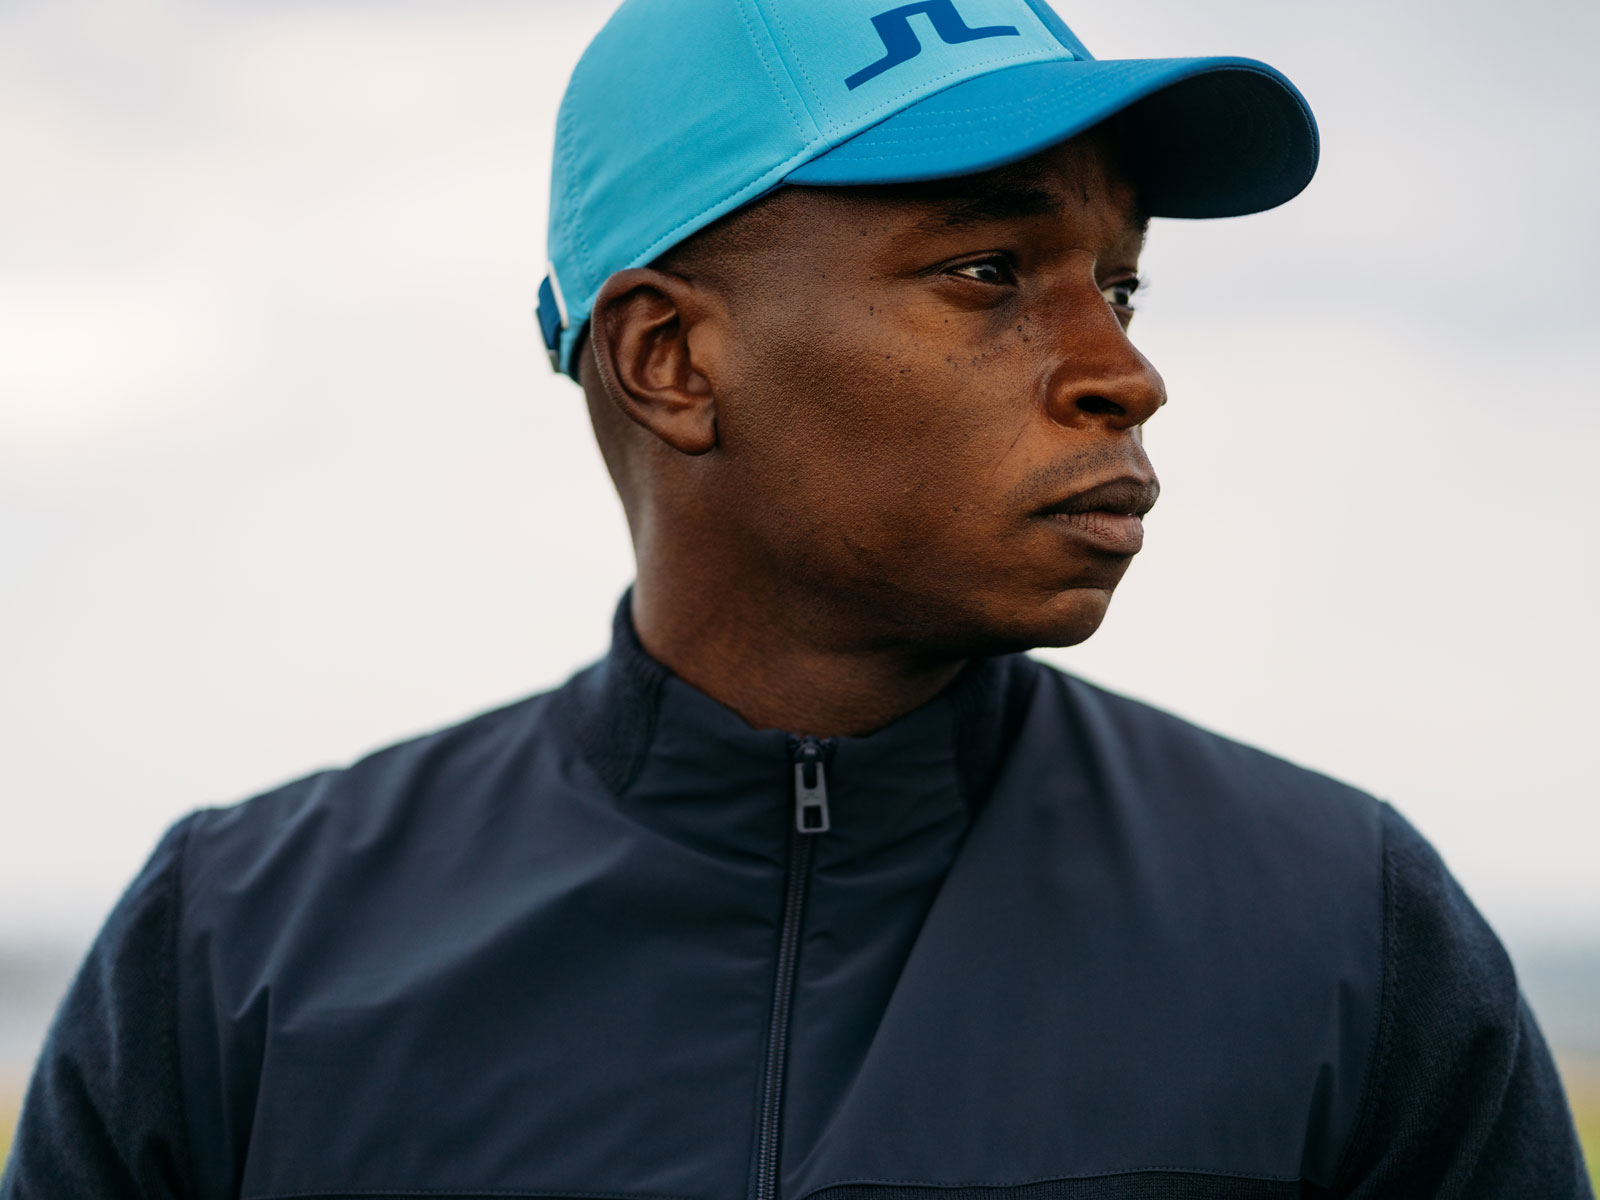 J Lindeberg Fall Winter 2020 Golf Collection 8